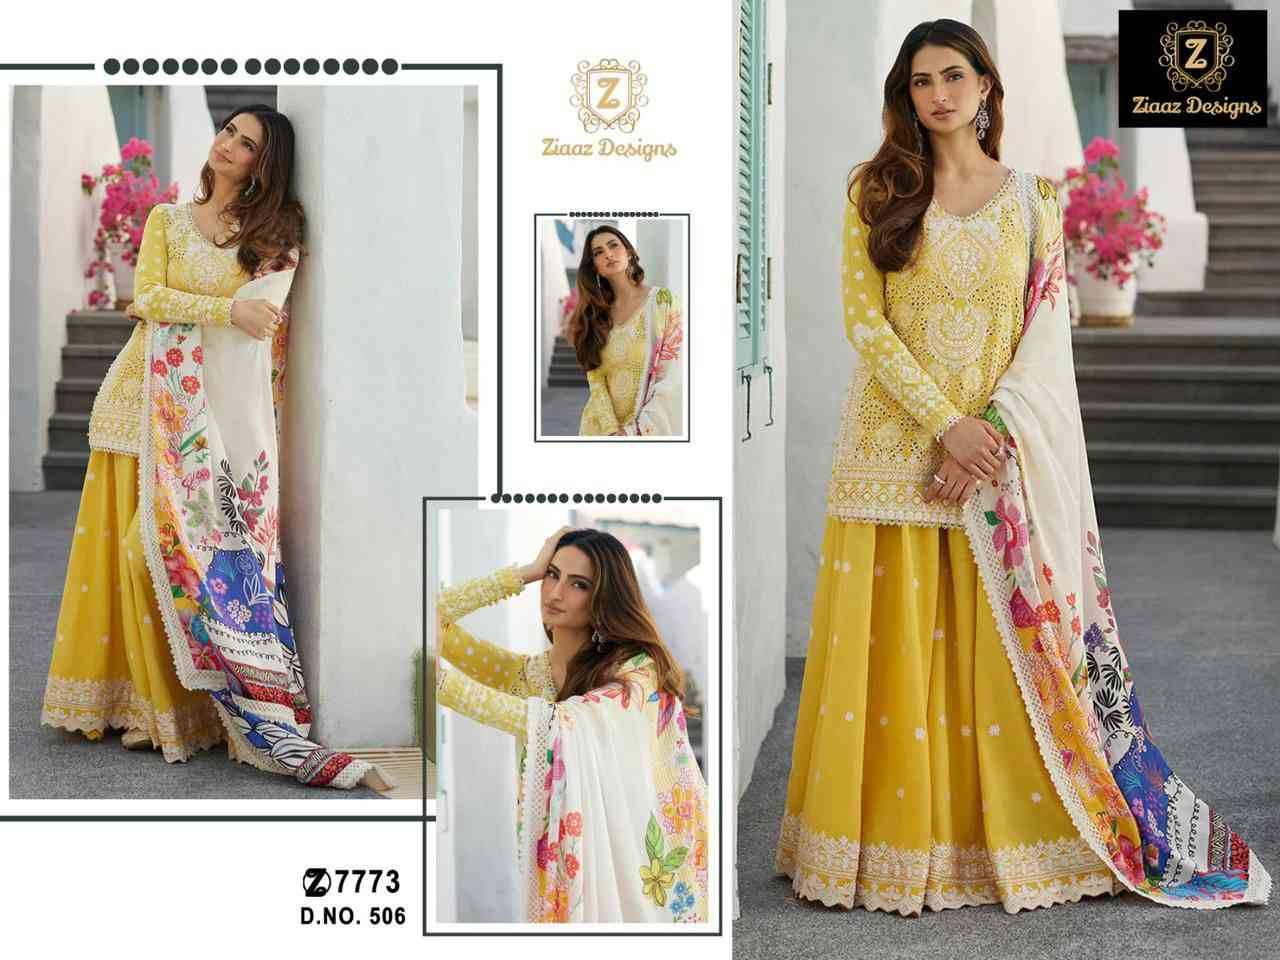 Ziaaz Designs Hit Design 506 By Ziaaz Designs Beautiful Pakistani Suits Colorful Stylish Fancy Casual Wear & Ethnic Wear Rayon Cotton Embroidered Dresses At Wholesale Price